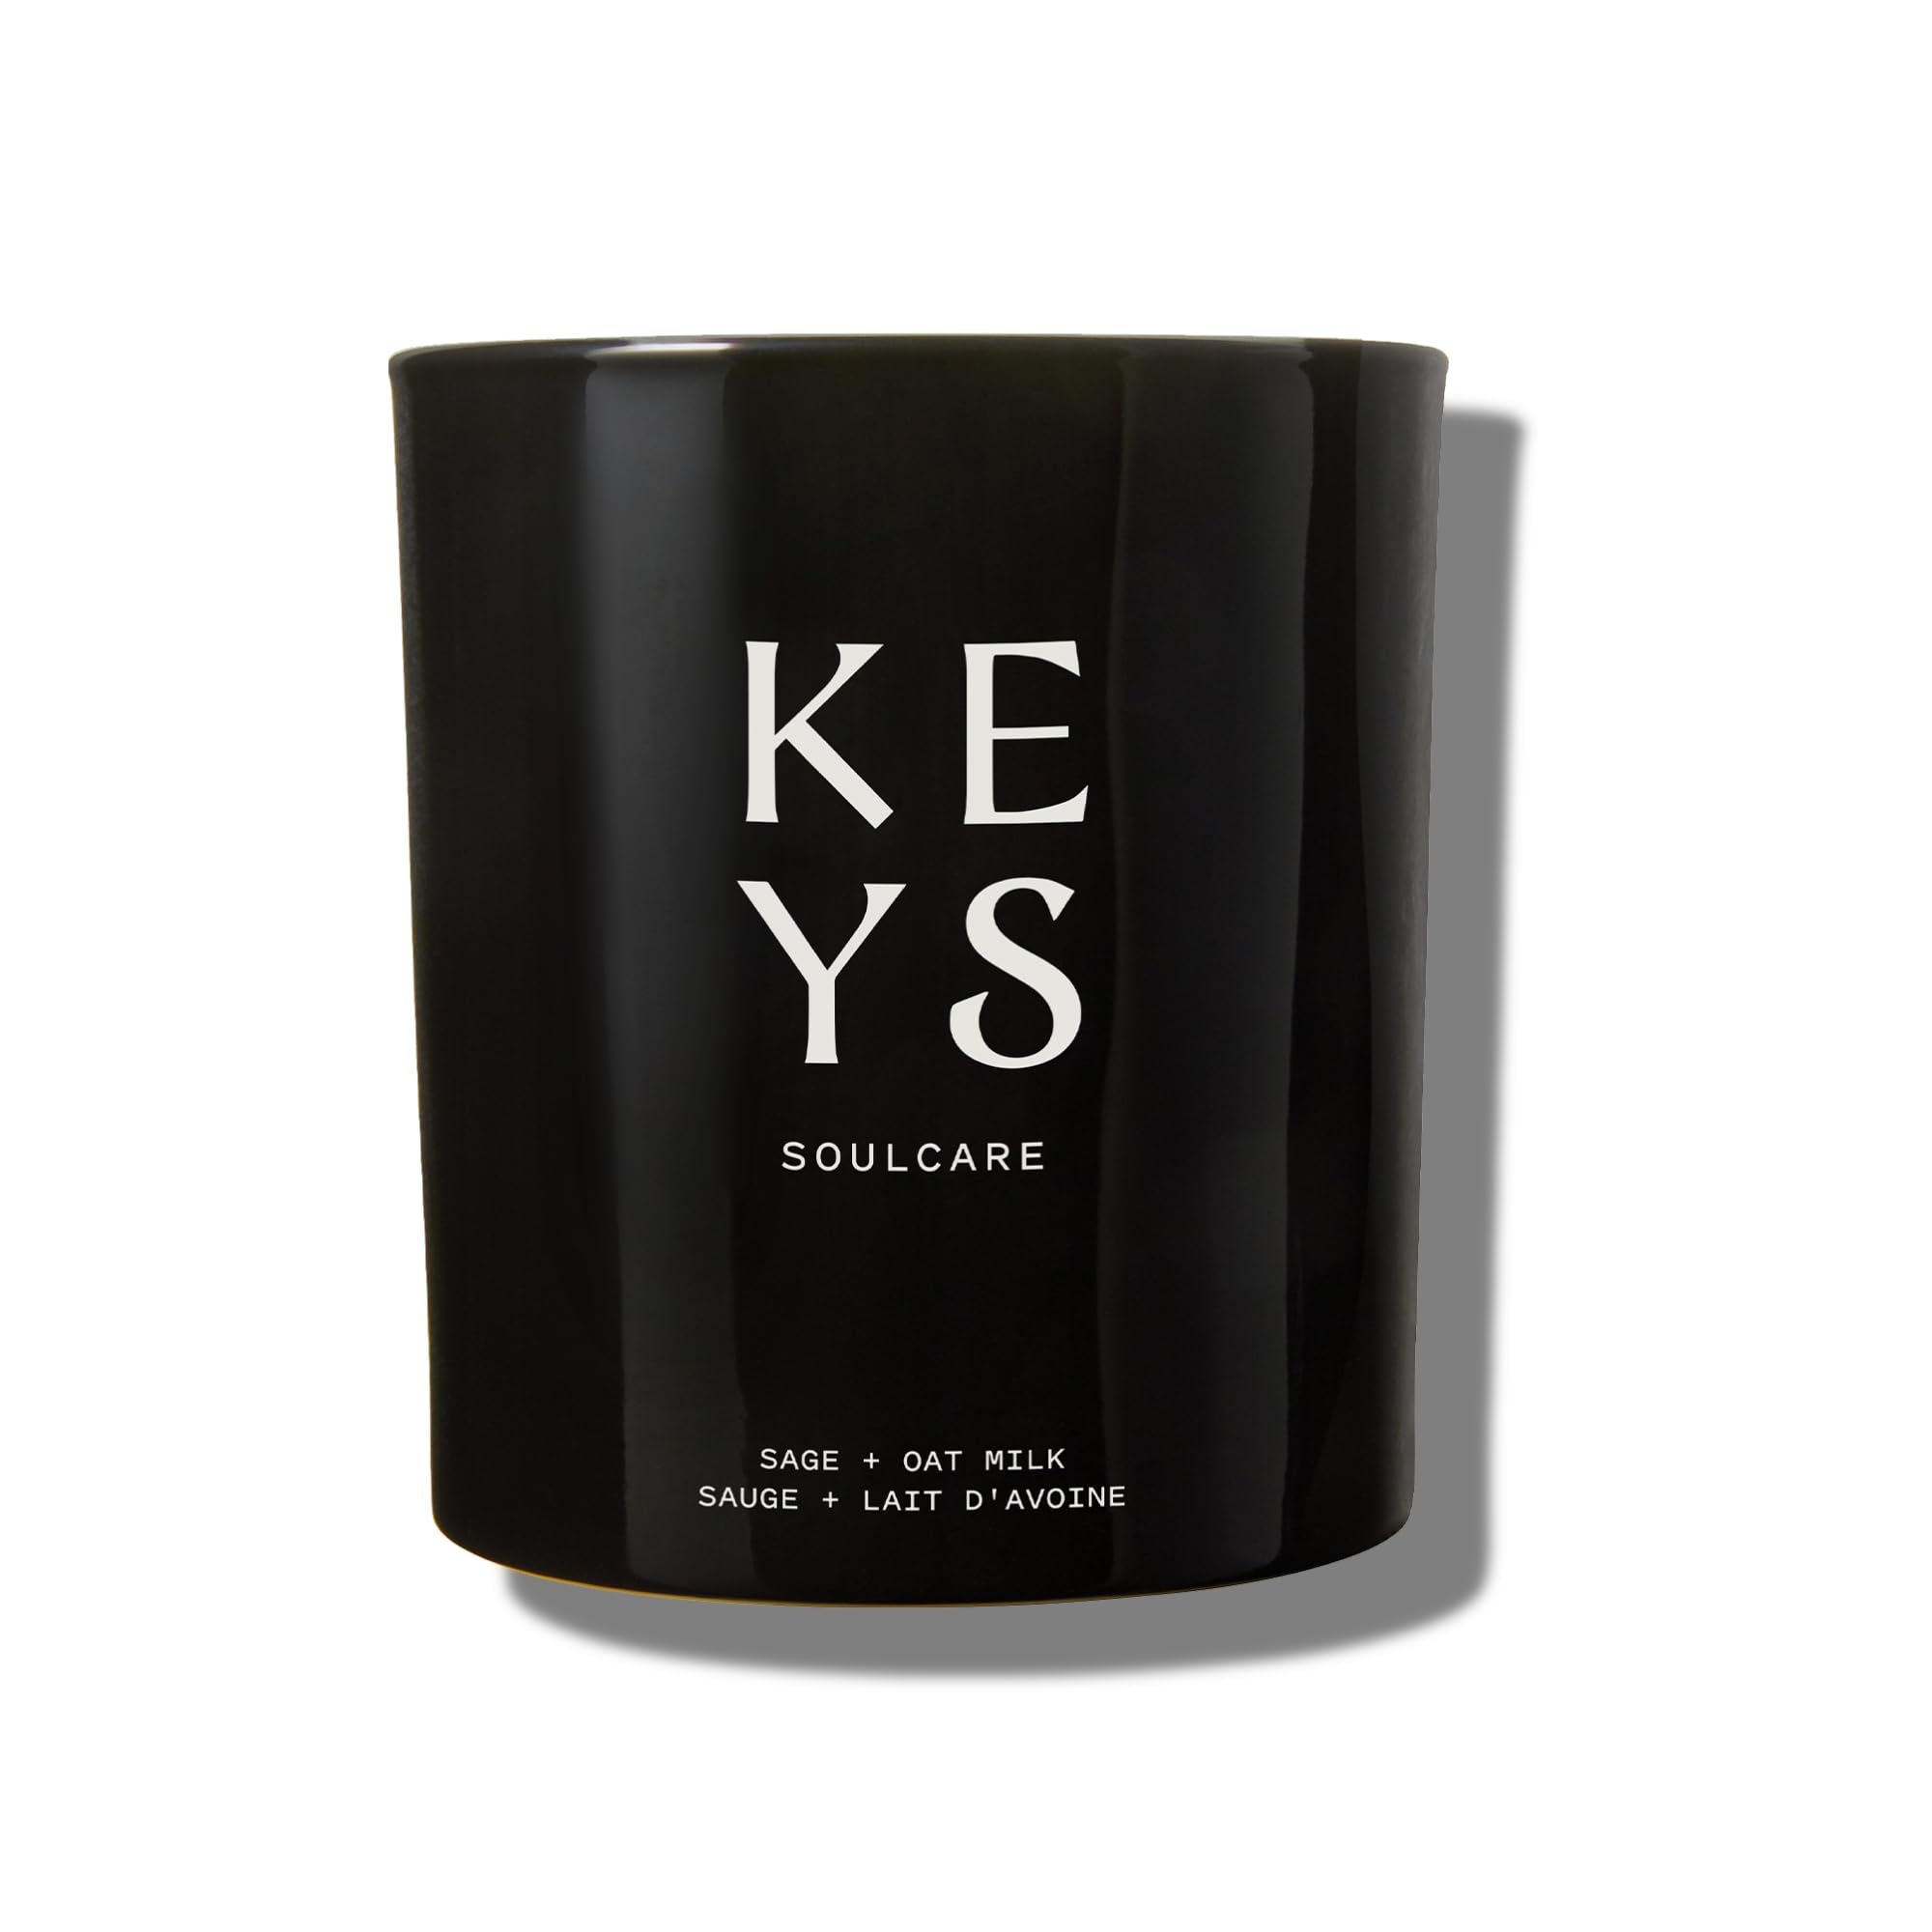 Keys Soulcare Sage + Oat Milk Candle, Single-Wick Home Fragrance, Calming + Relaxing Scent for Body & Mind, Soy Wax, Vegan, Cruelty-Free, 7.5 Oz